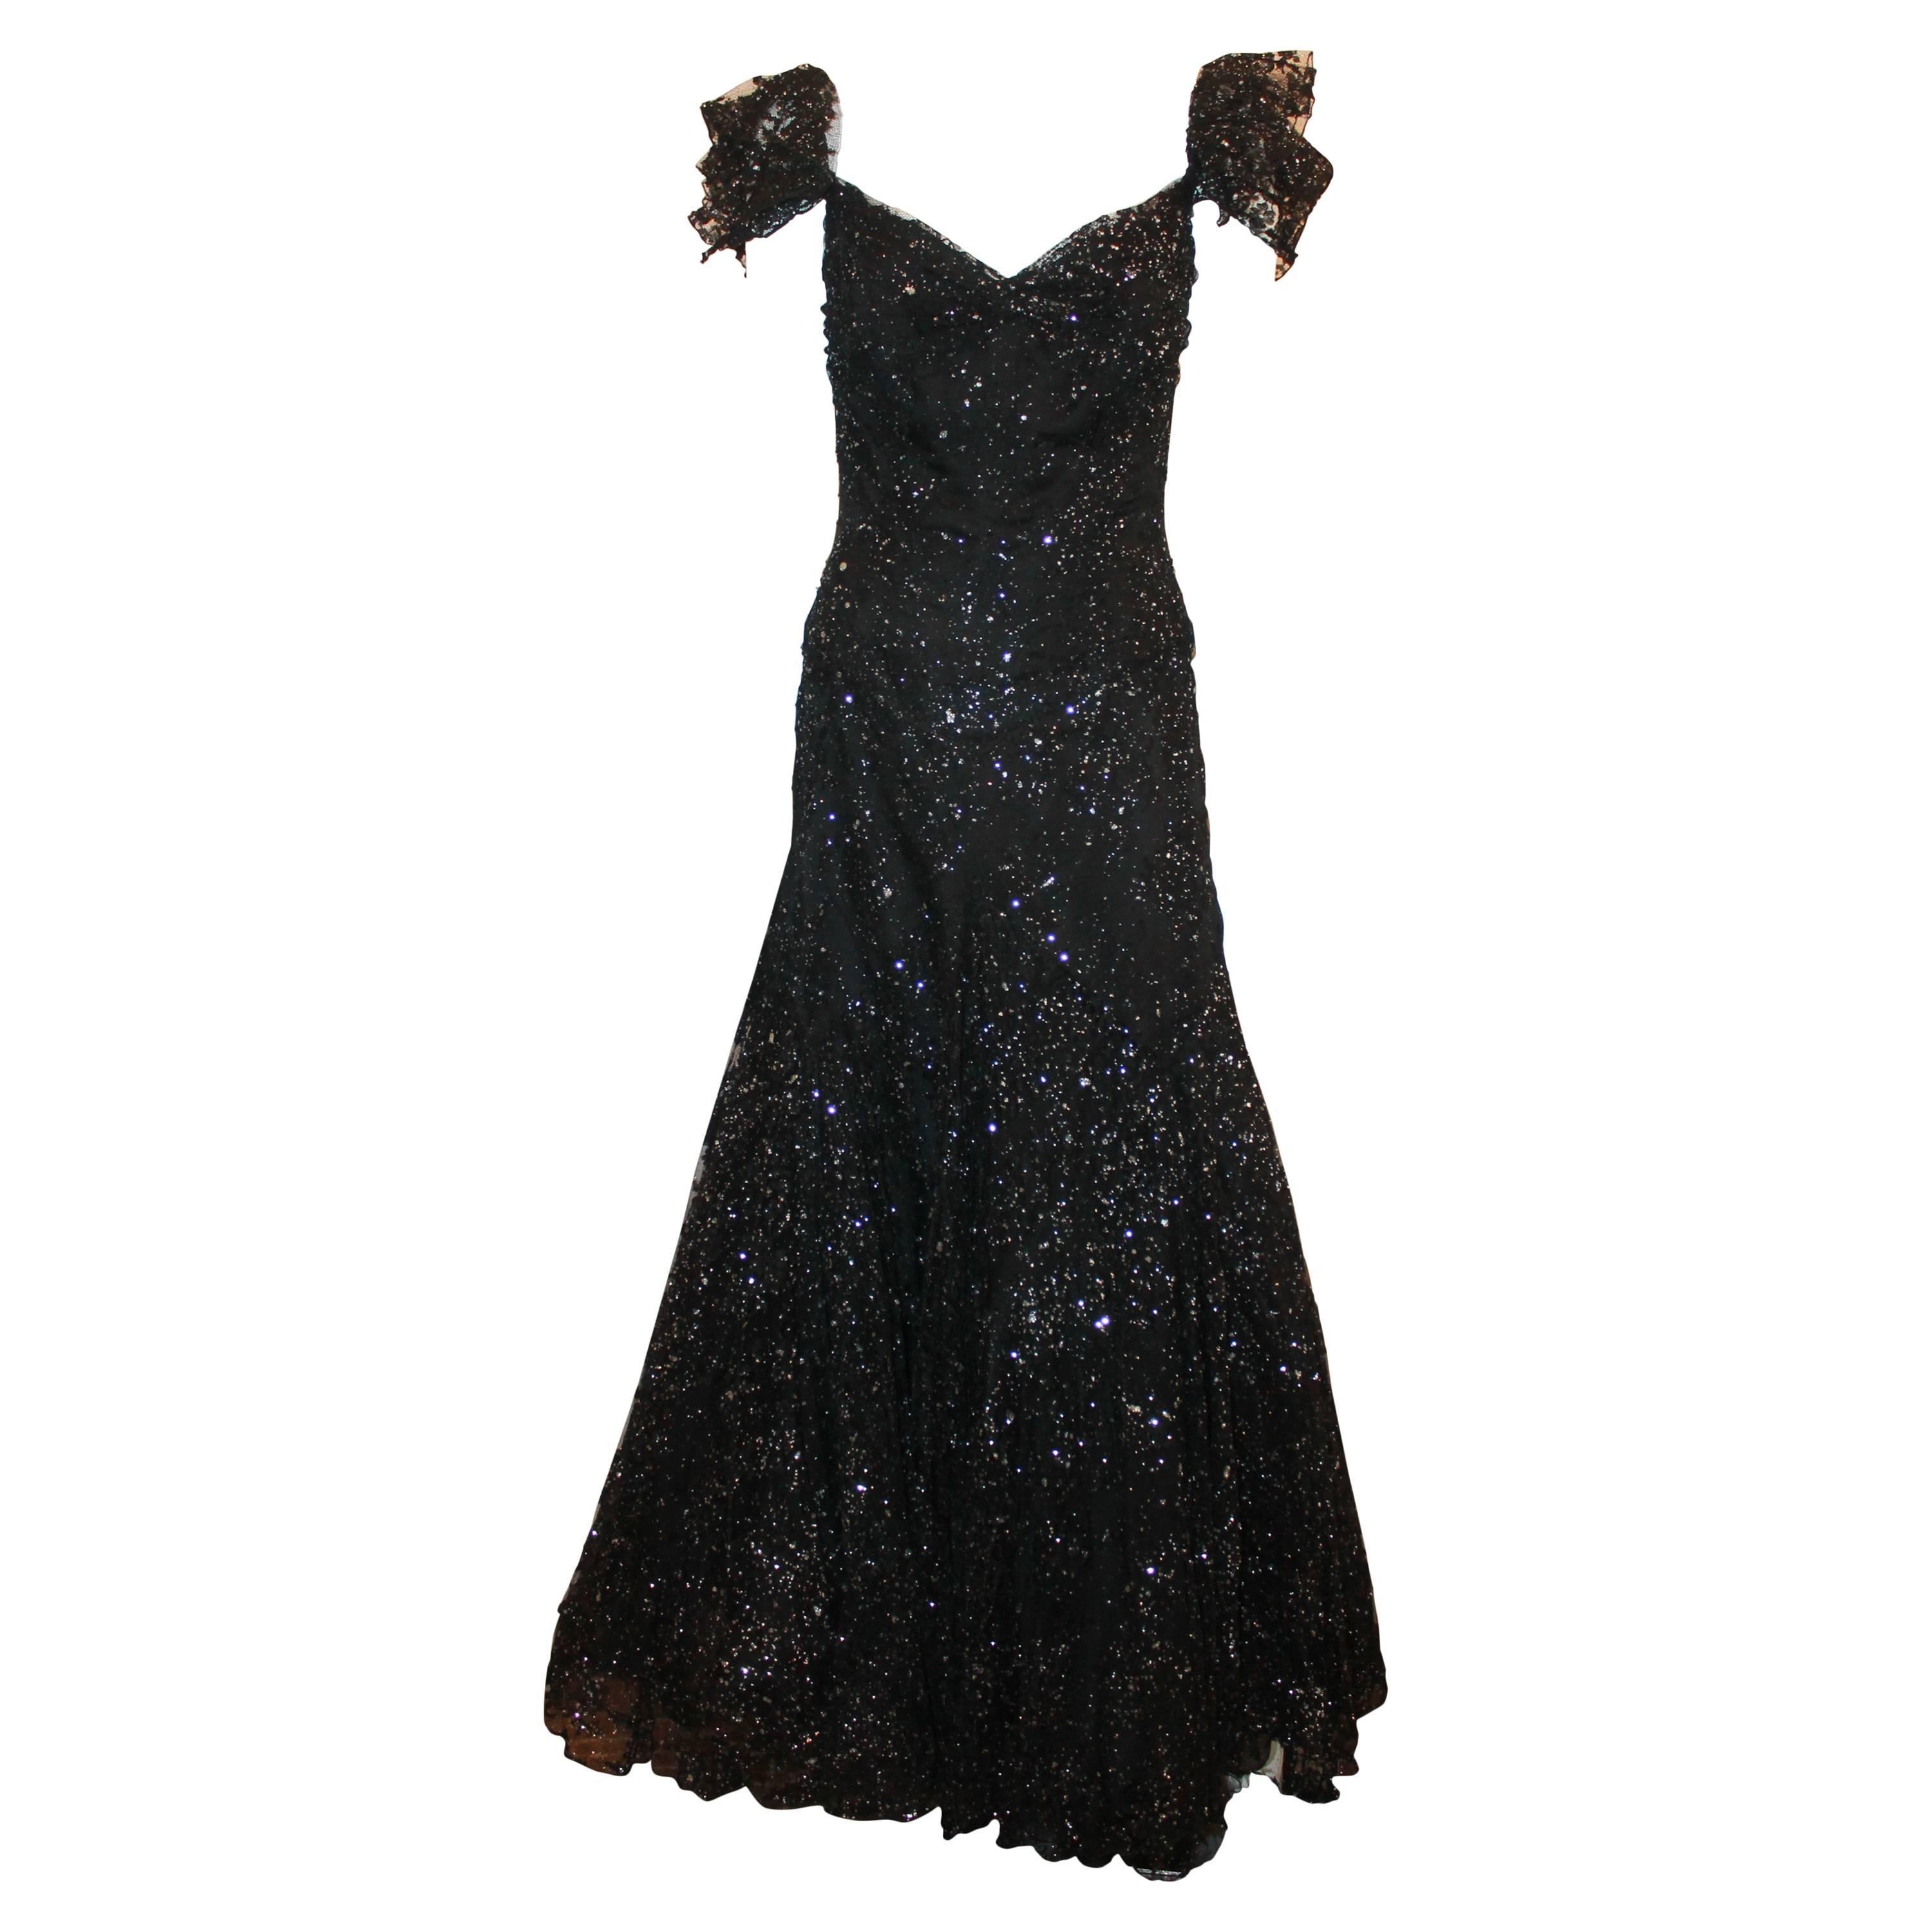 Vicky Tiel Black and Silver Tulle Lace Off the Shoulder Gown - 42.  This gorgeous gown is in excellent condition.  It features a gorgeous black tulle with silver accents, a built-in corset to the hips, an adjustable elastic ruffle strap, and a flare